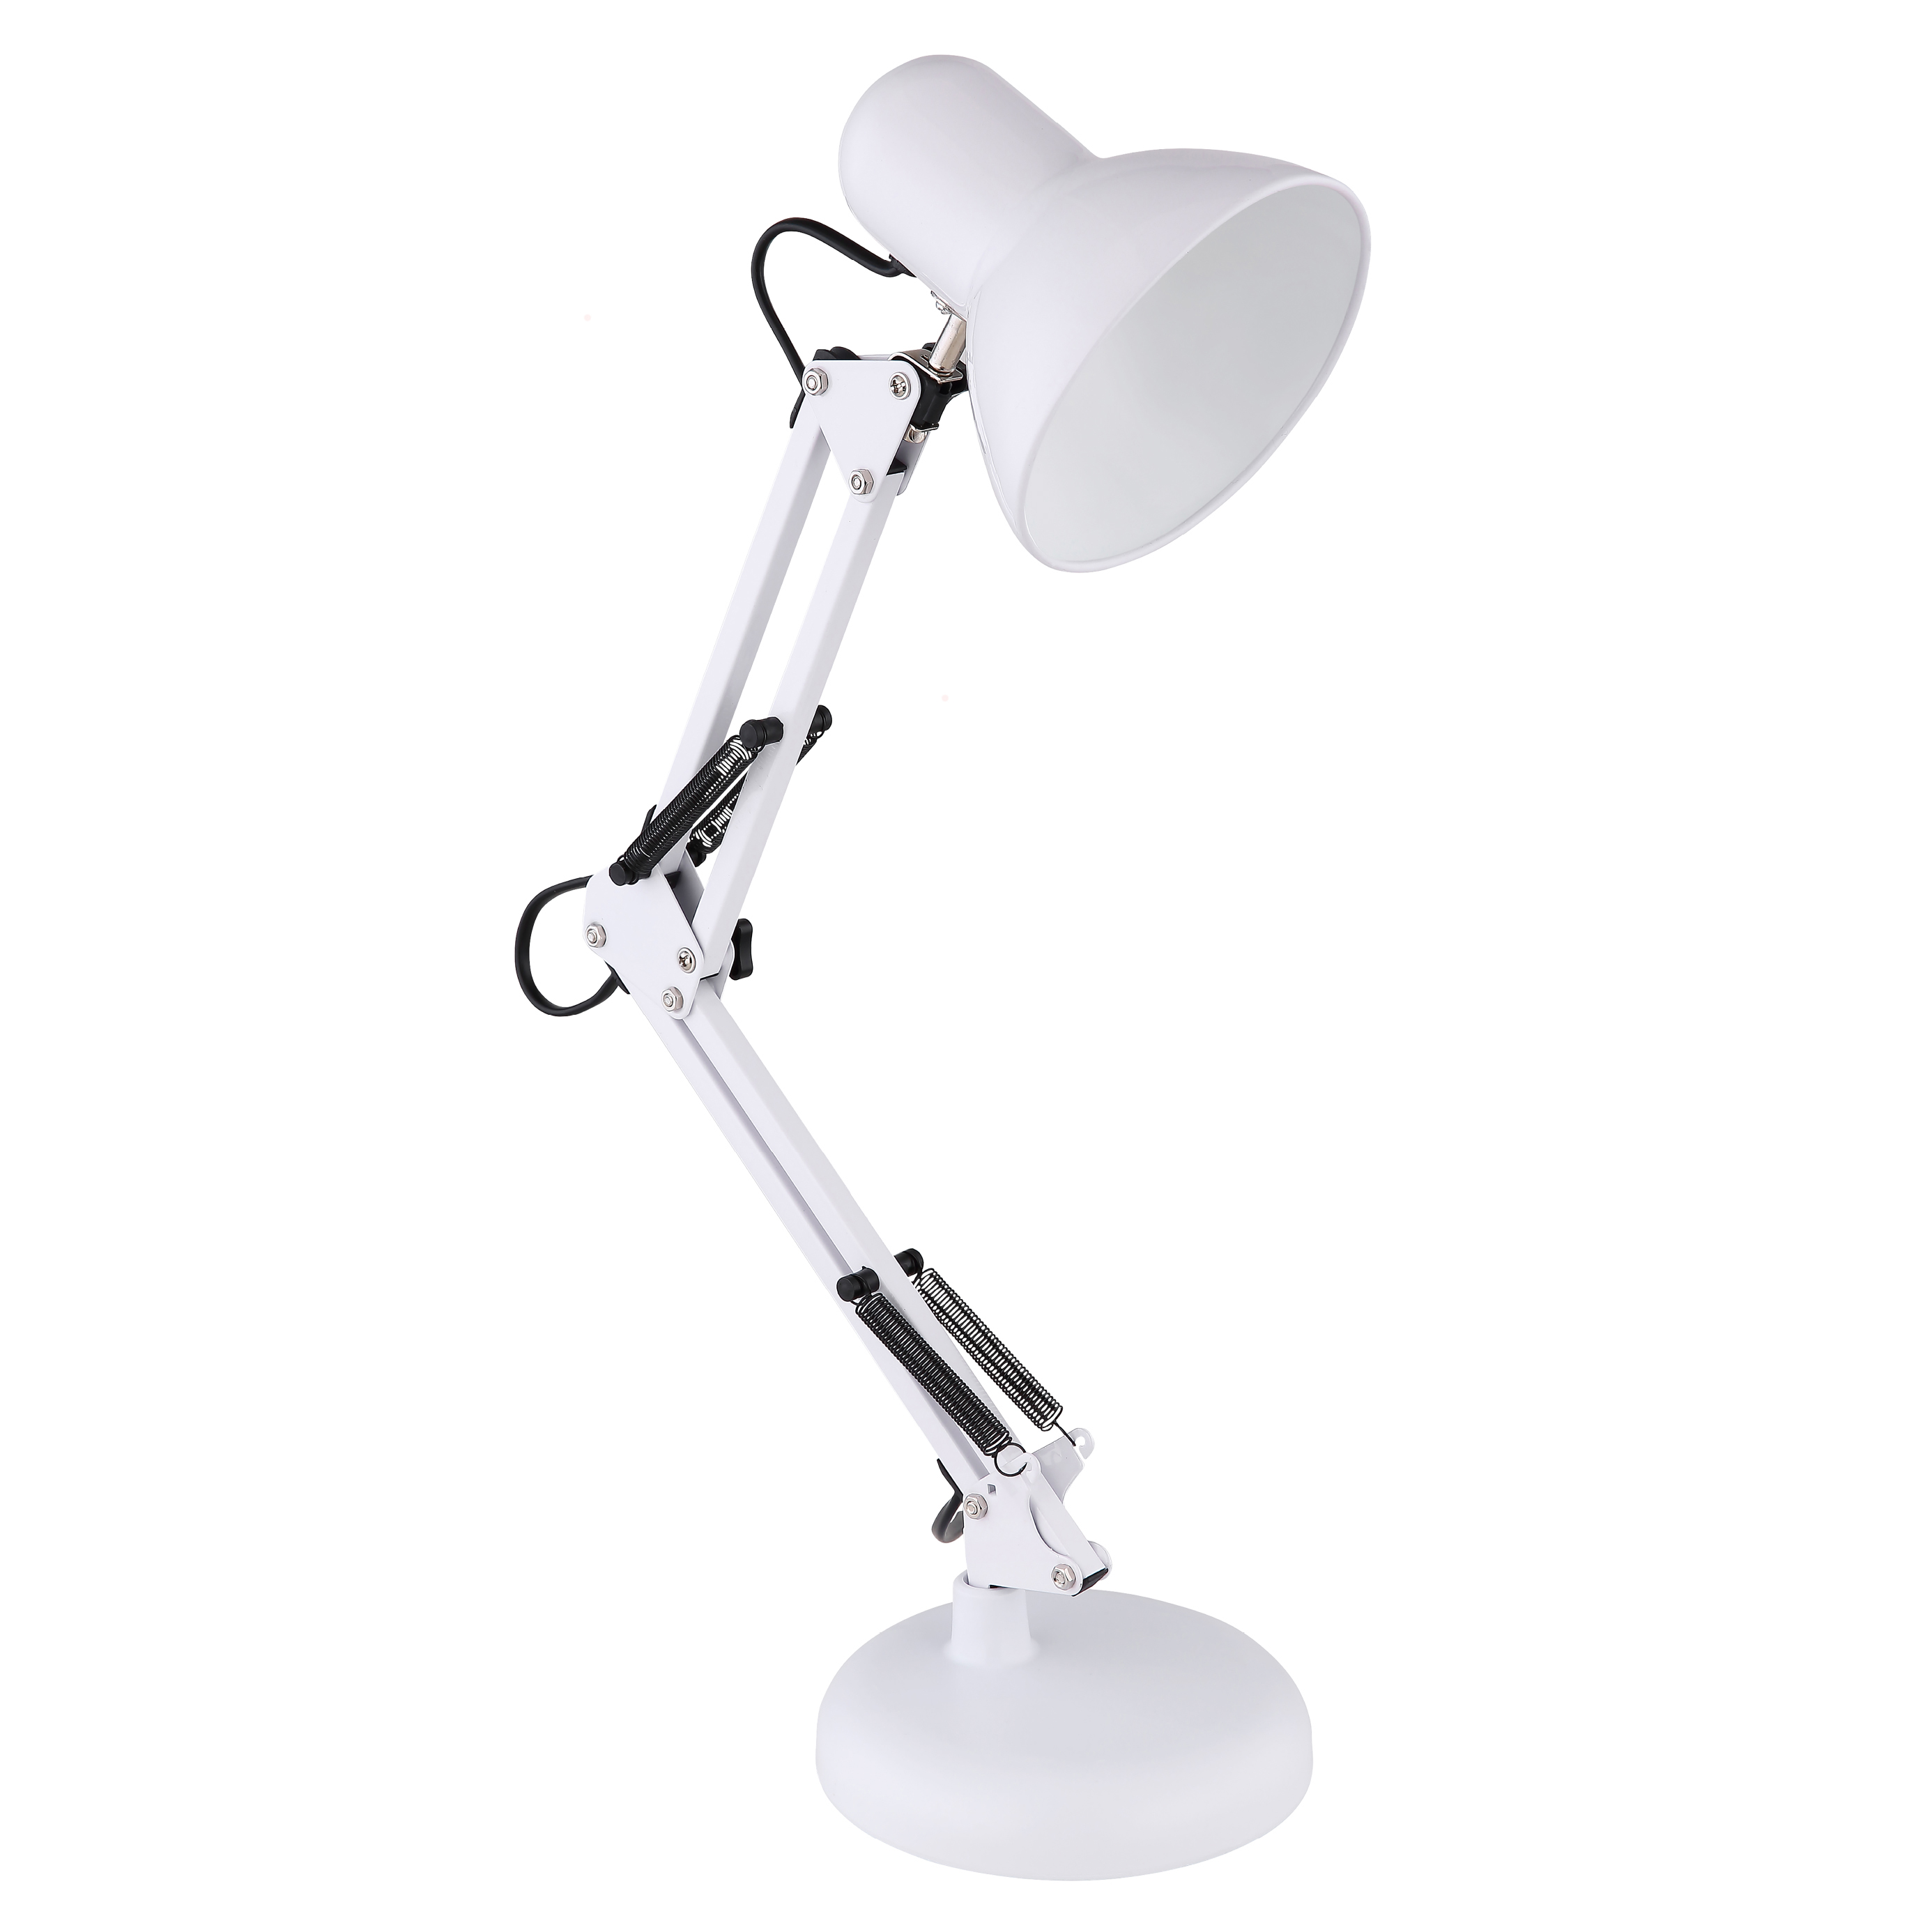 SM-800A metal swing arm classic table lamp